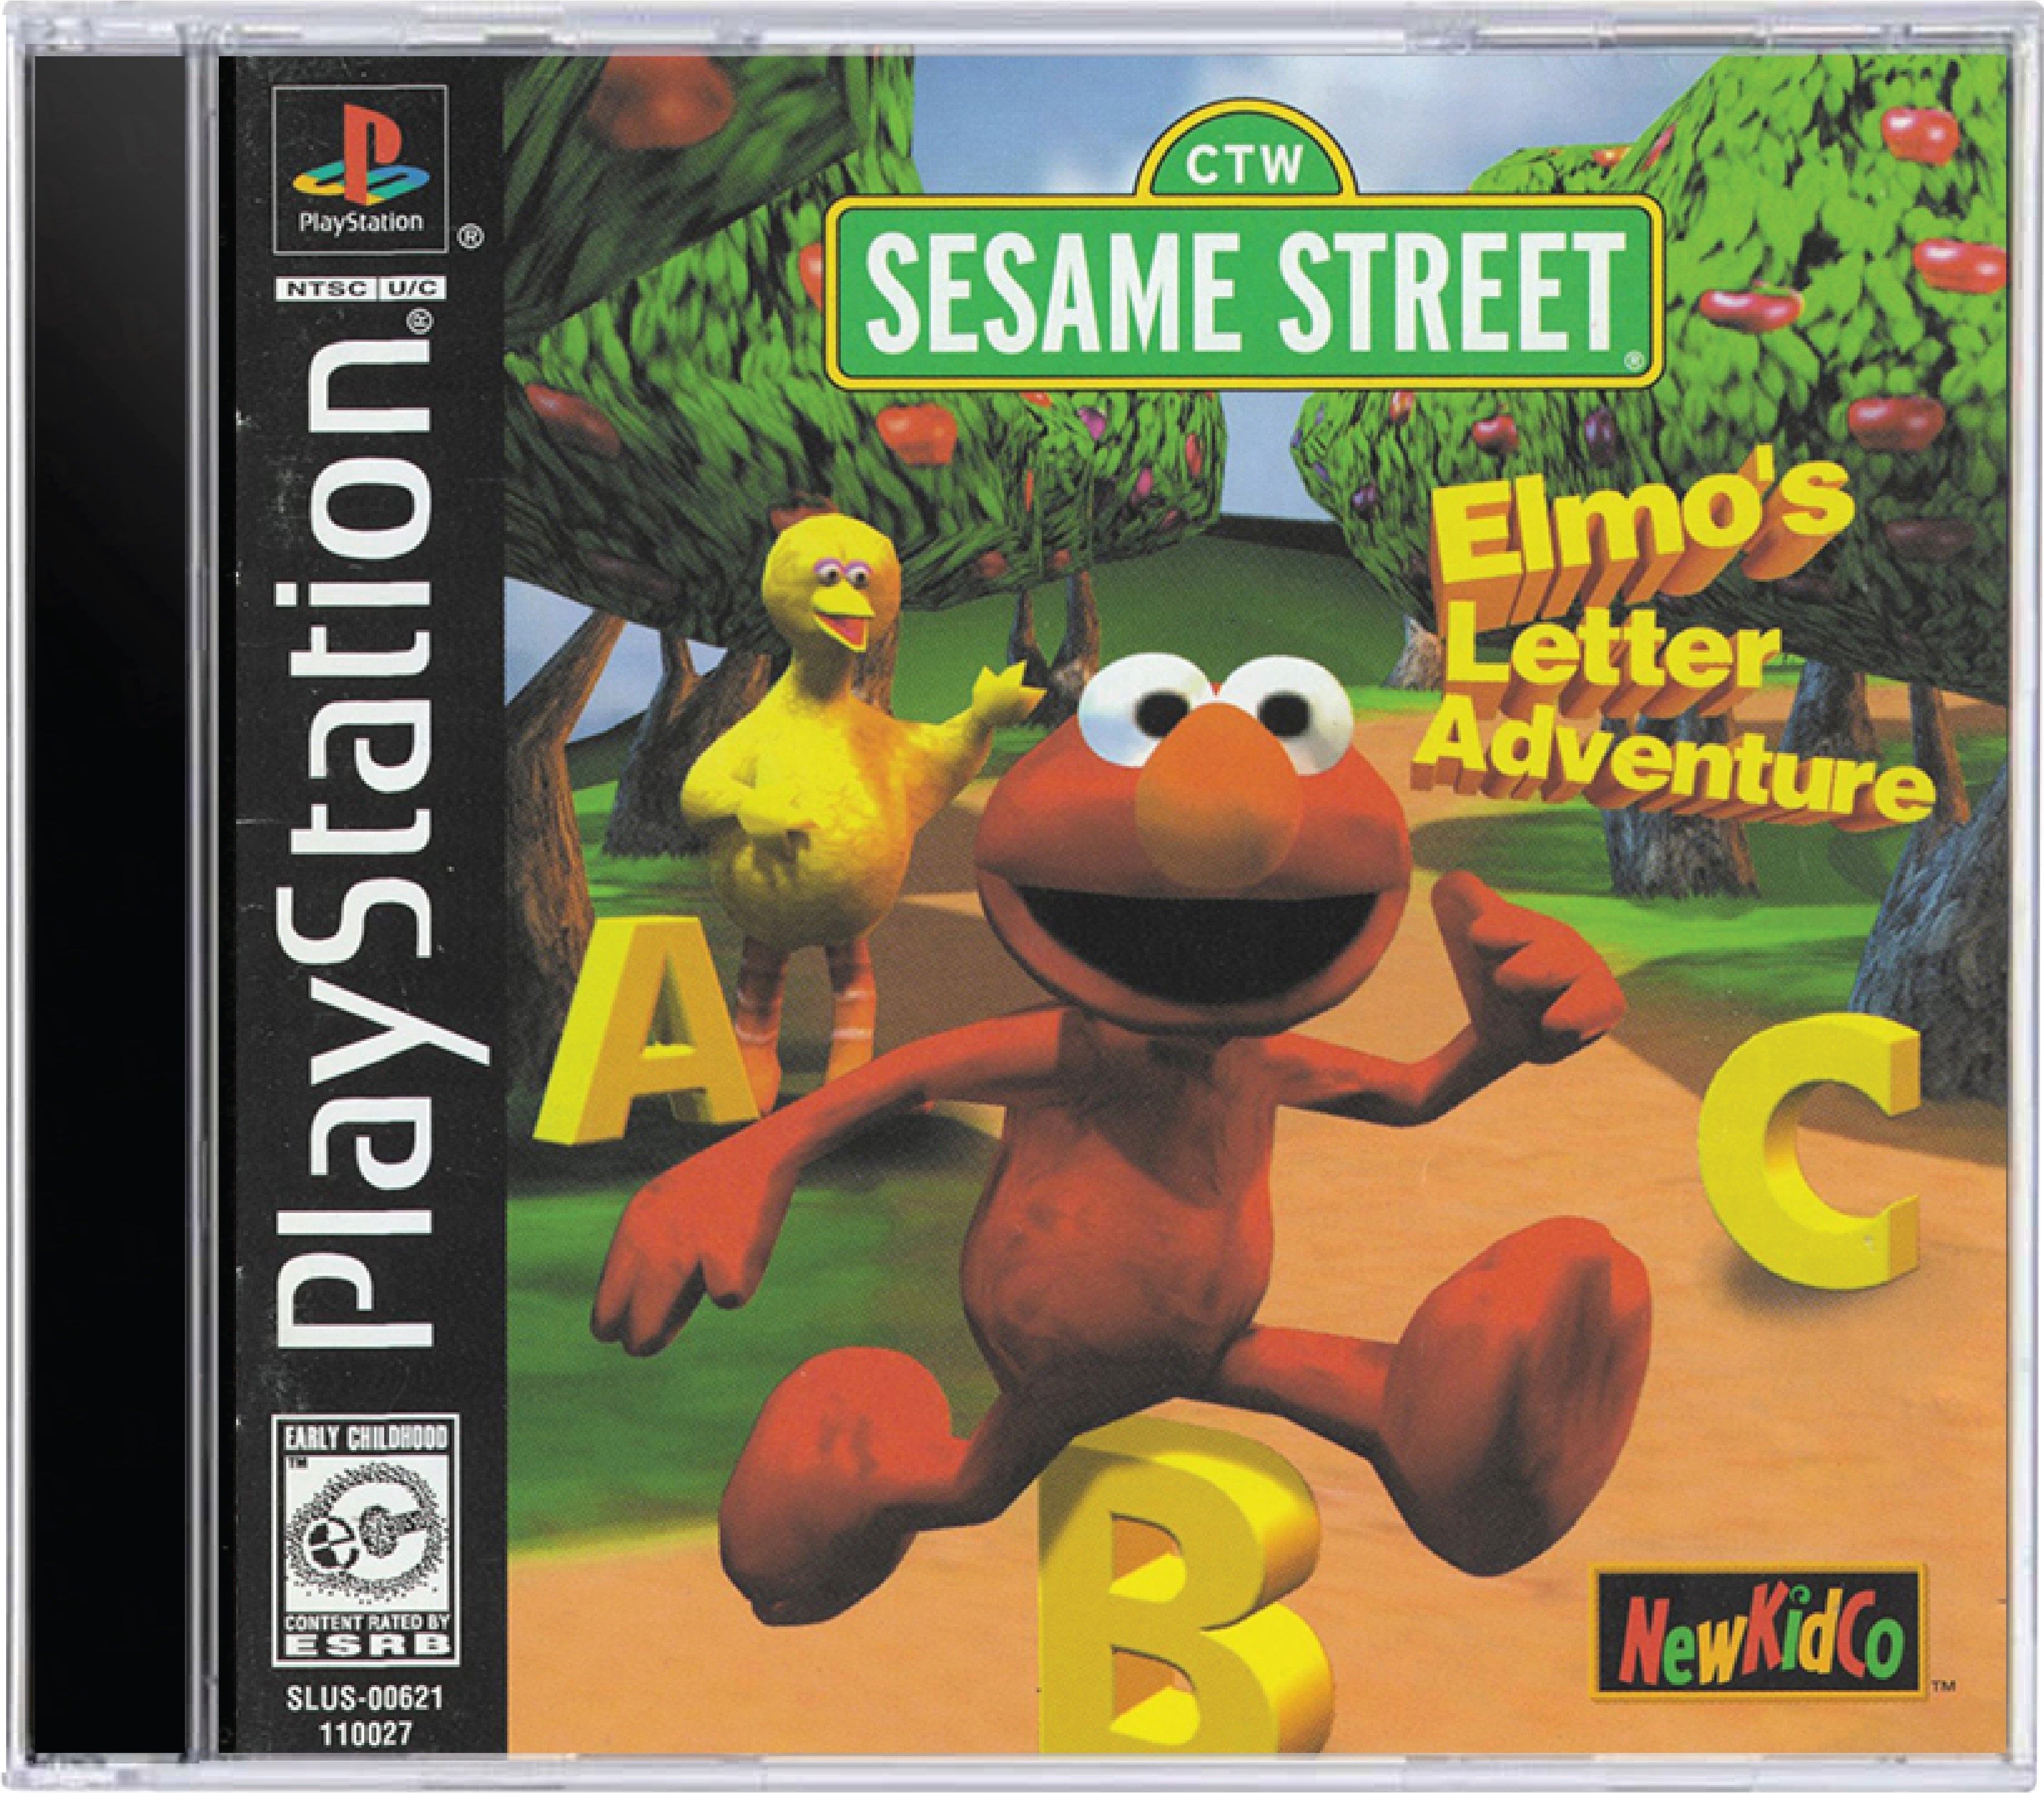 Elmo's Letter Adventure Cover Art and Product Photo